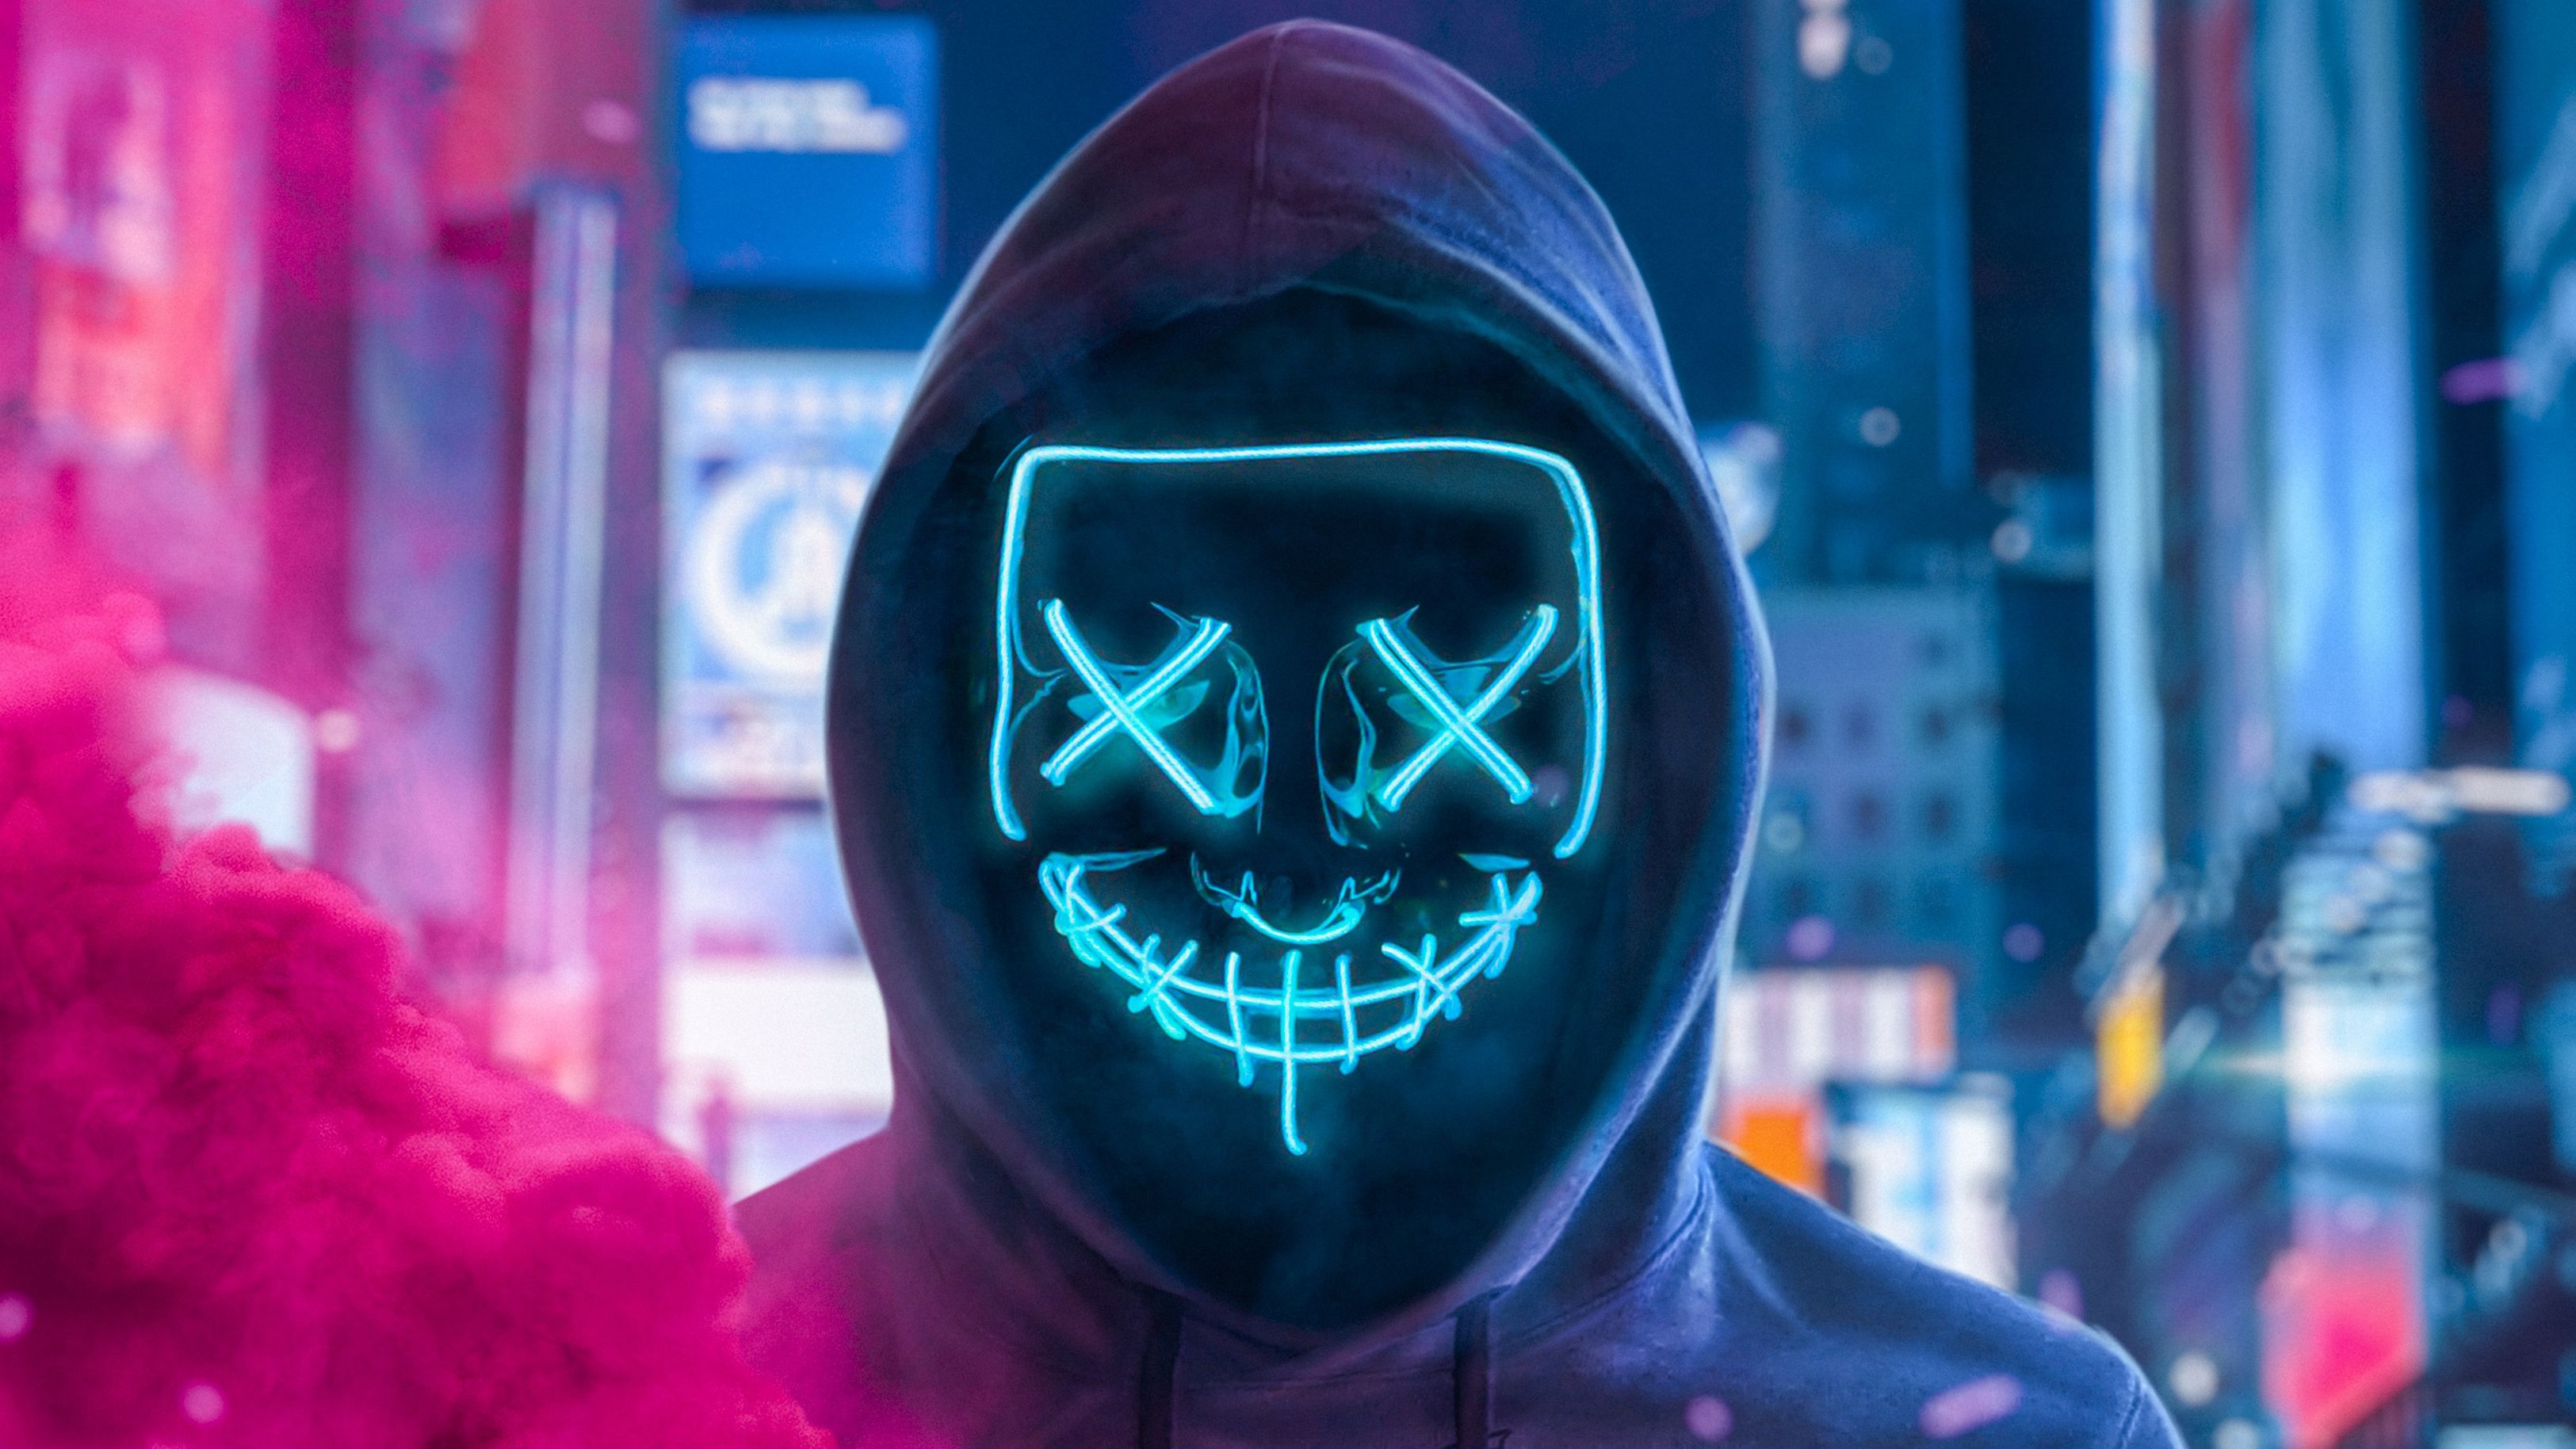 Neon Mask Pc 4k Wallpapers Wallpaper Cave 0251